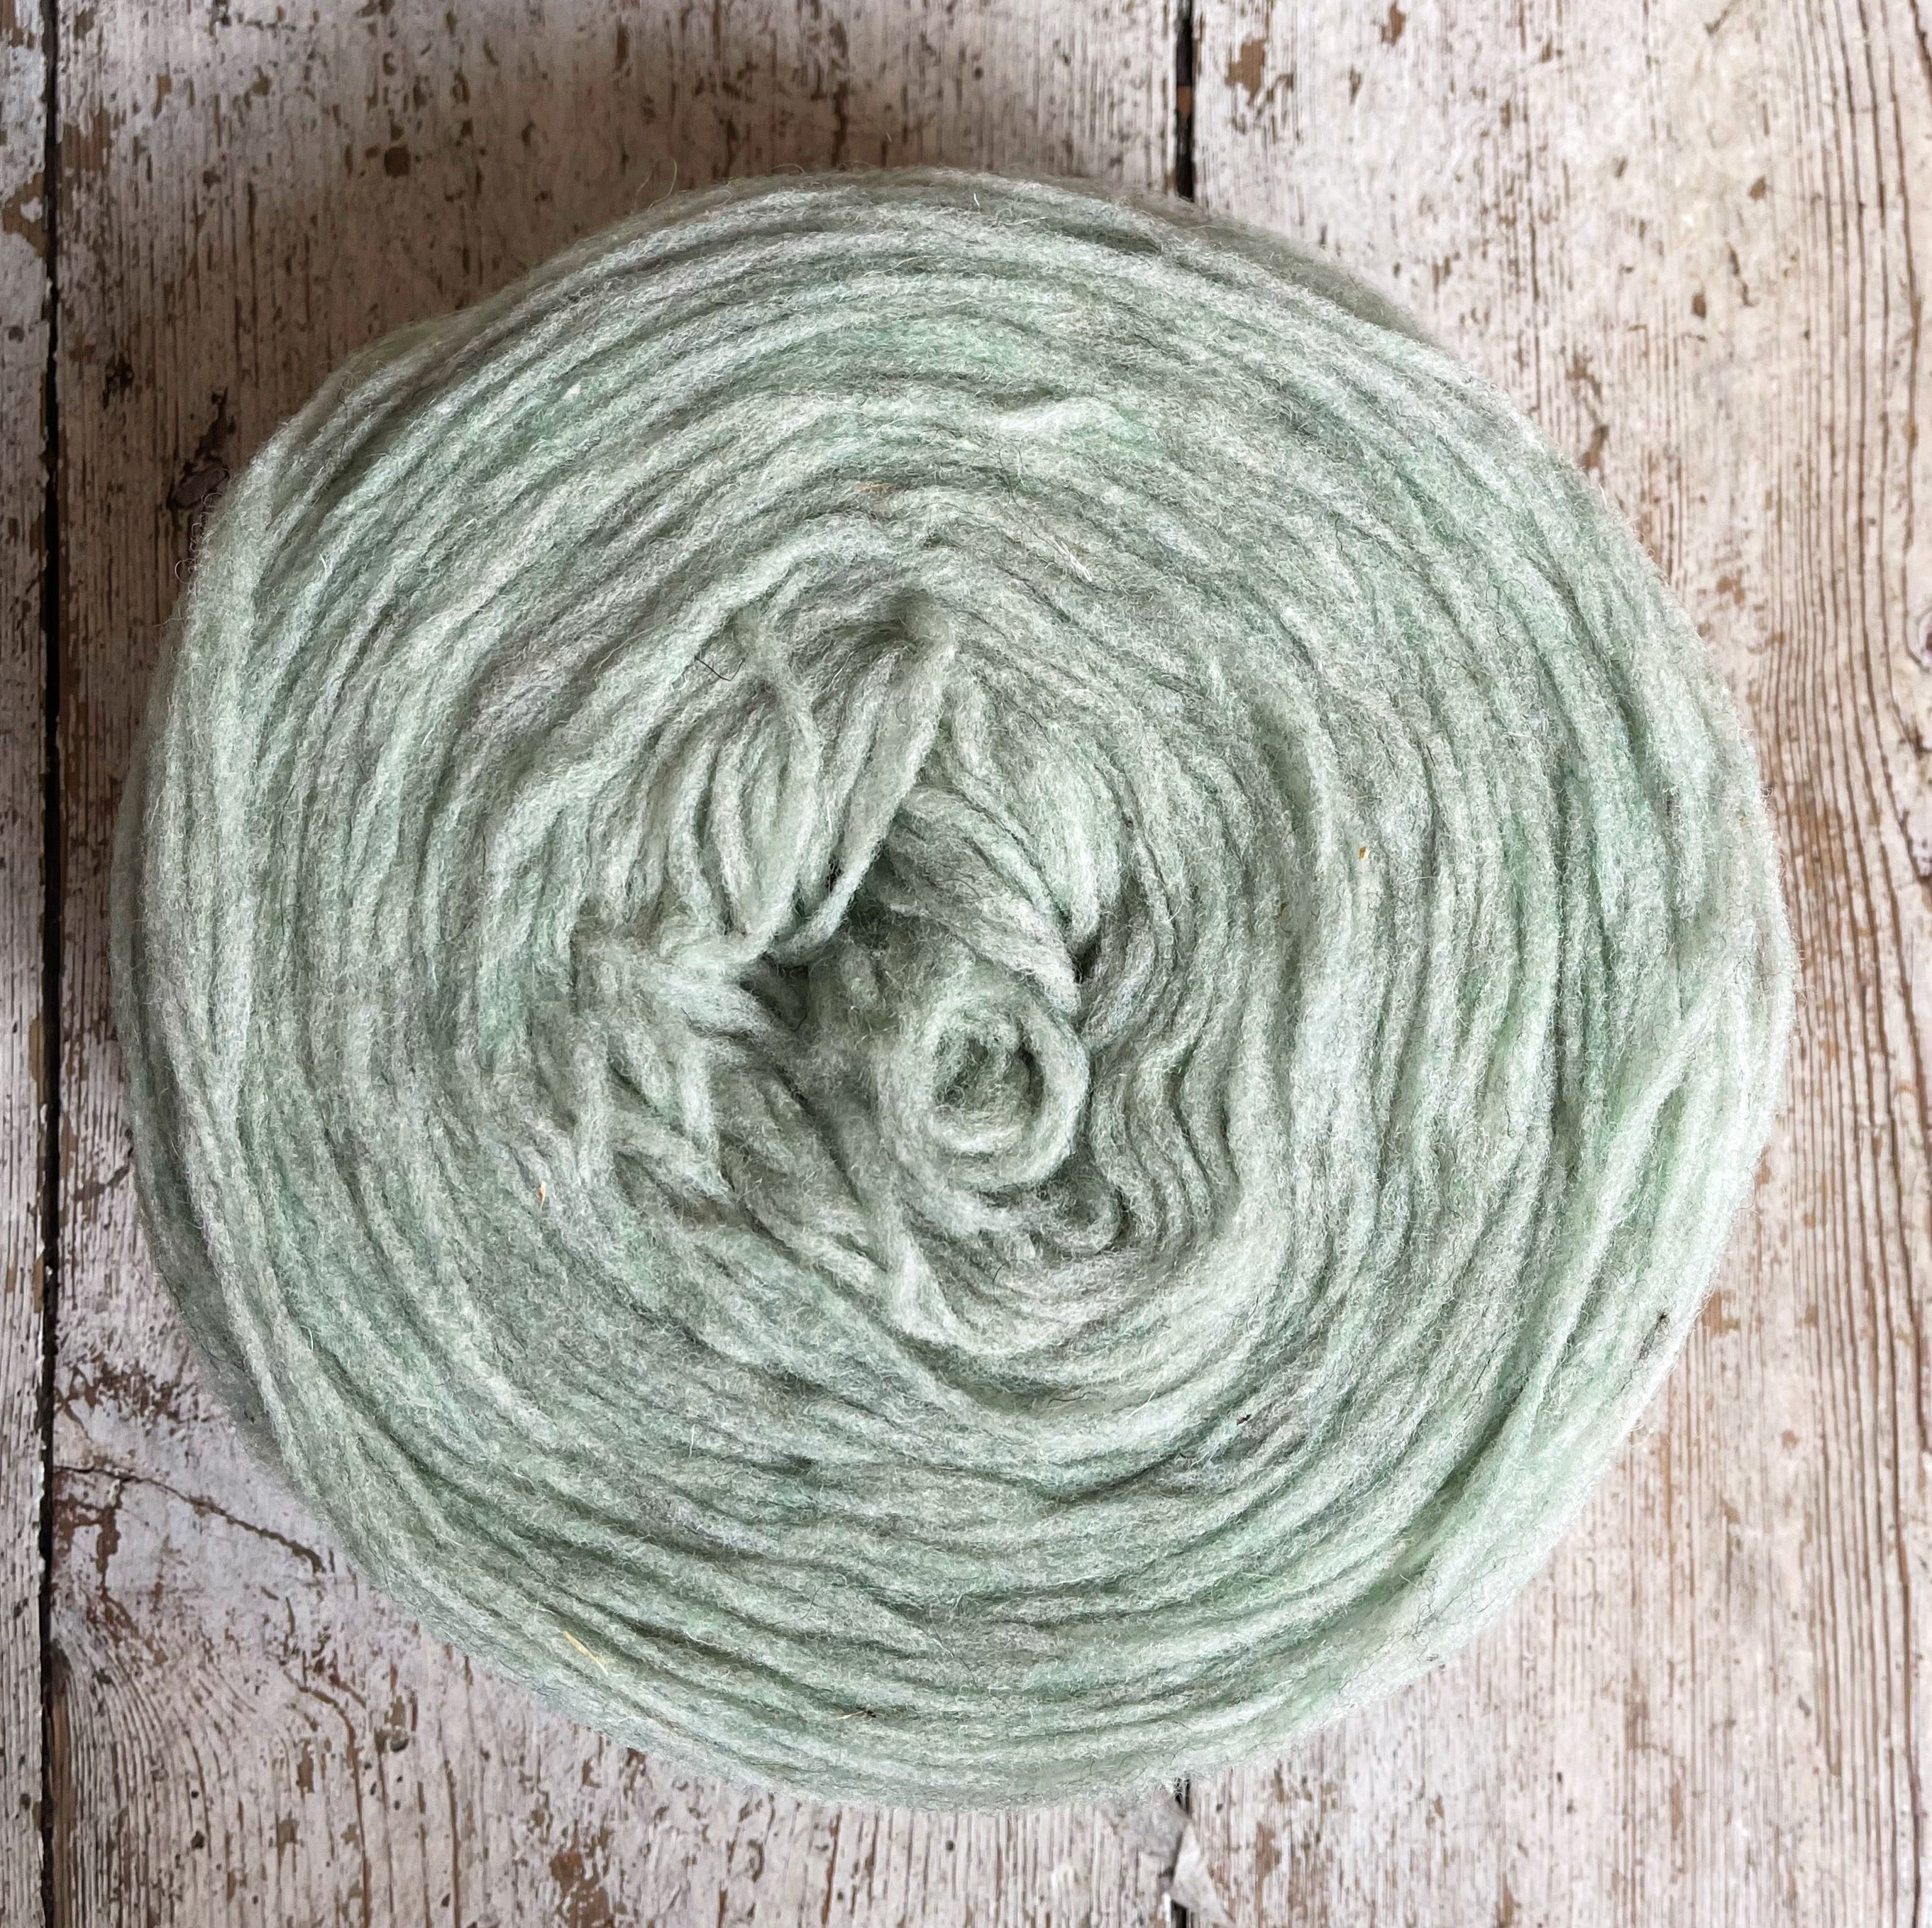 Buy Shades of Green Yarn Online In India -  India